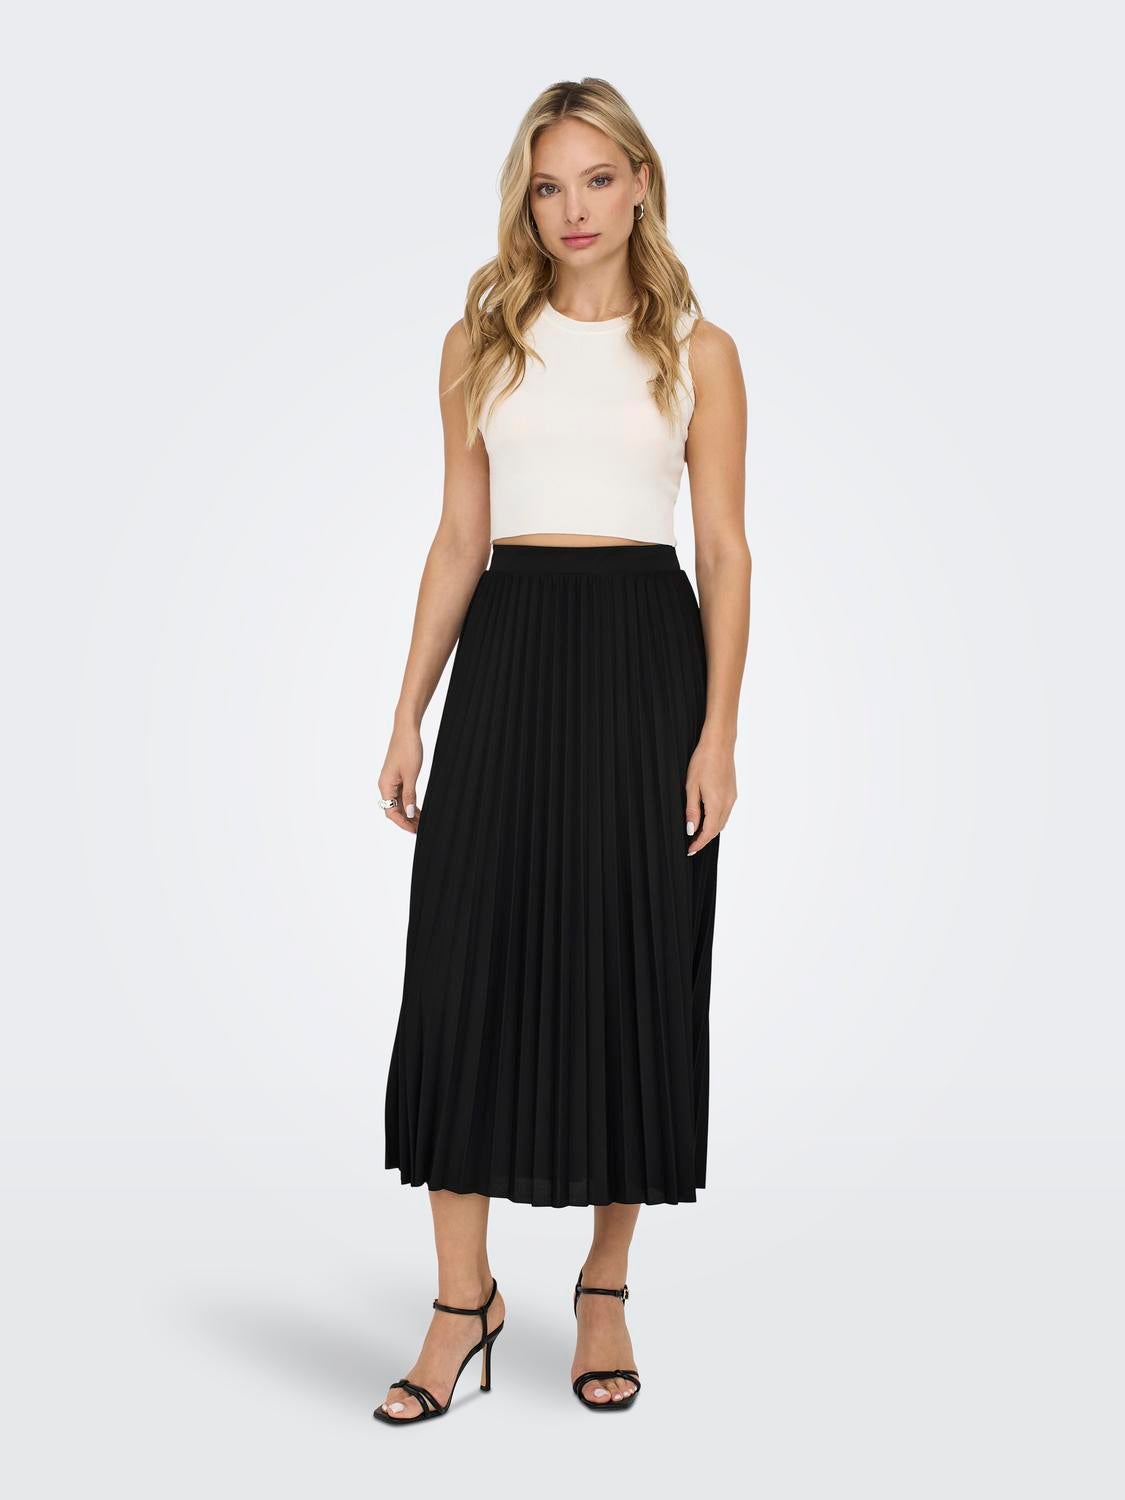 Casual Plisse Skirt Outfit